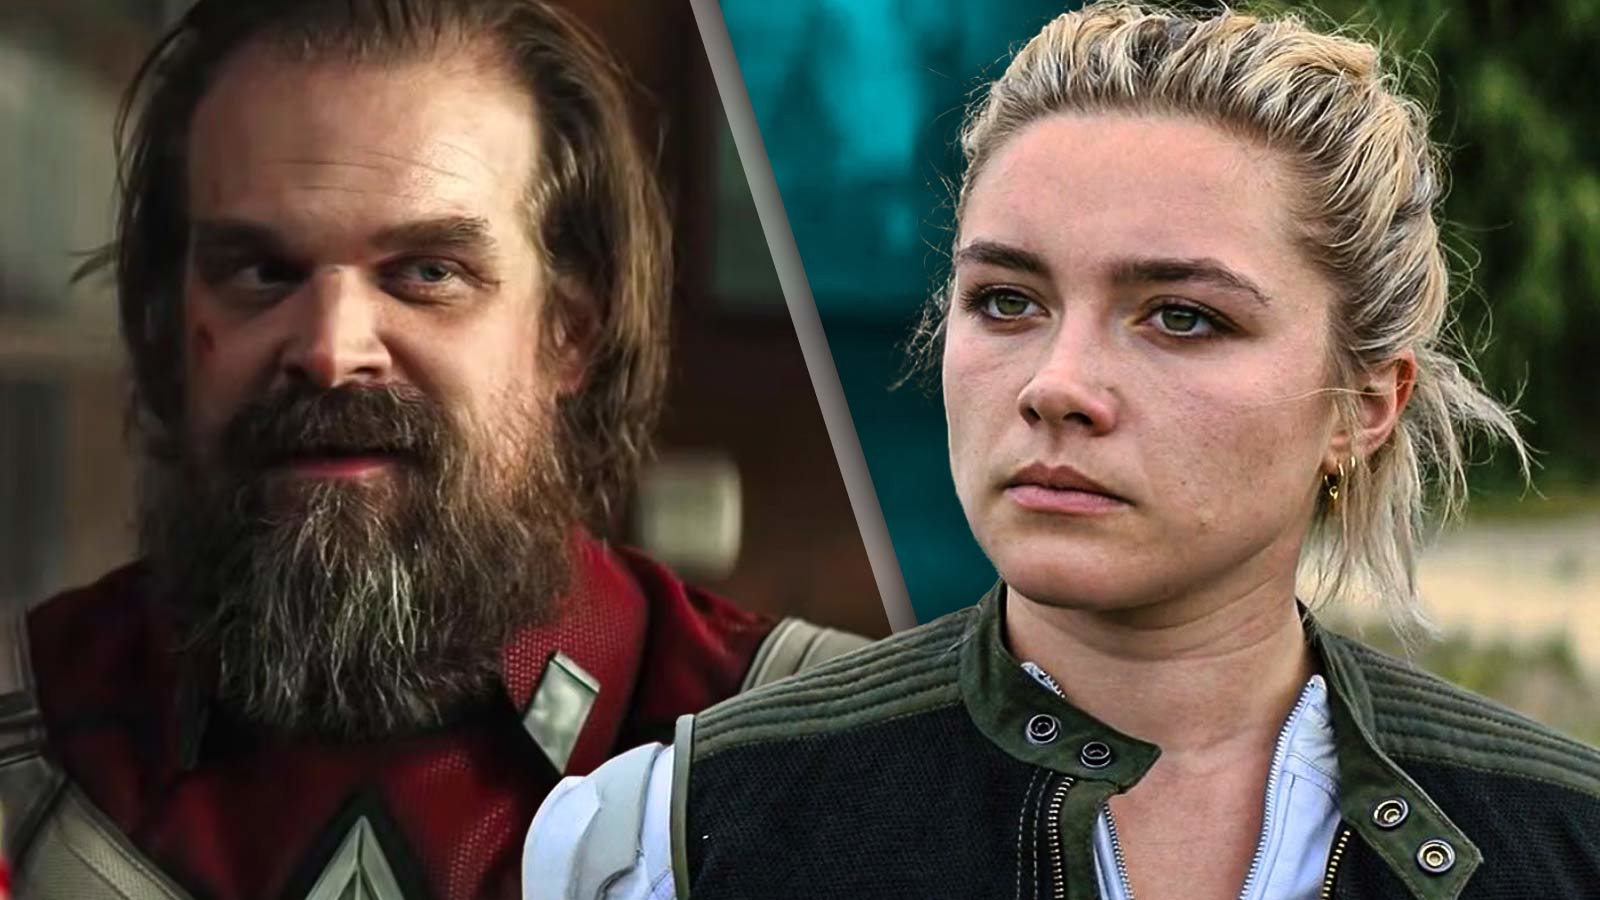 David Harbour and Florence Pugh Have No Qualms About Being Villains in Thunderbolts*, Claims “There’s warmth and humour” Even Between Narcissistic Assassins